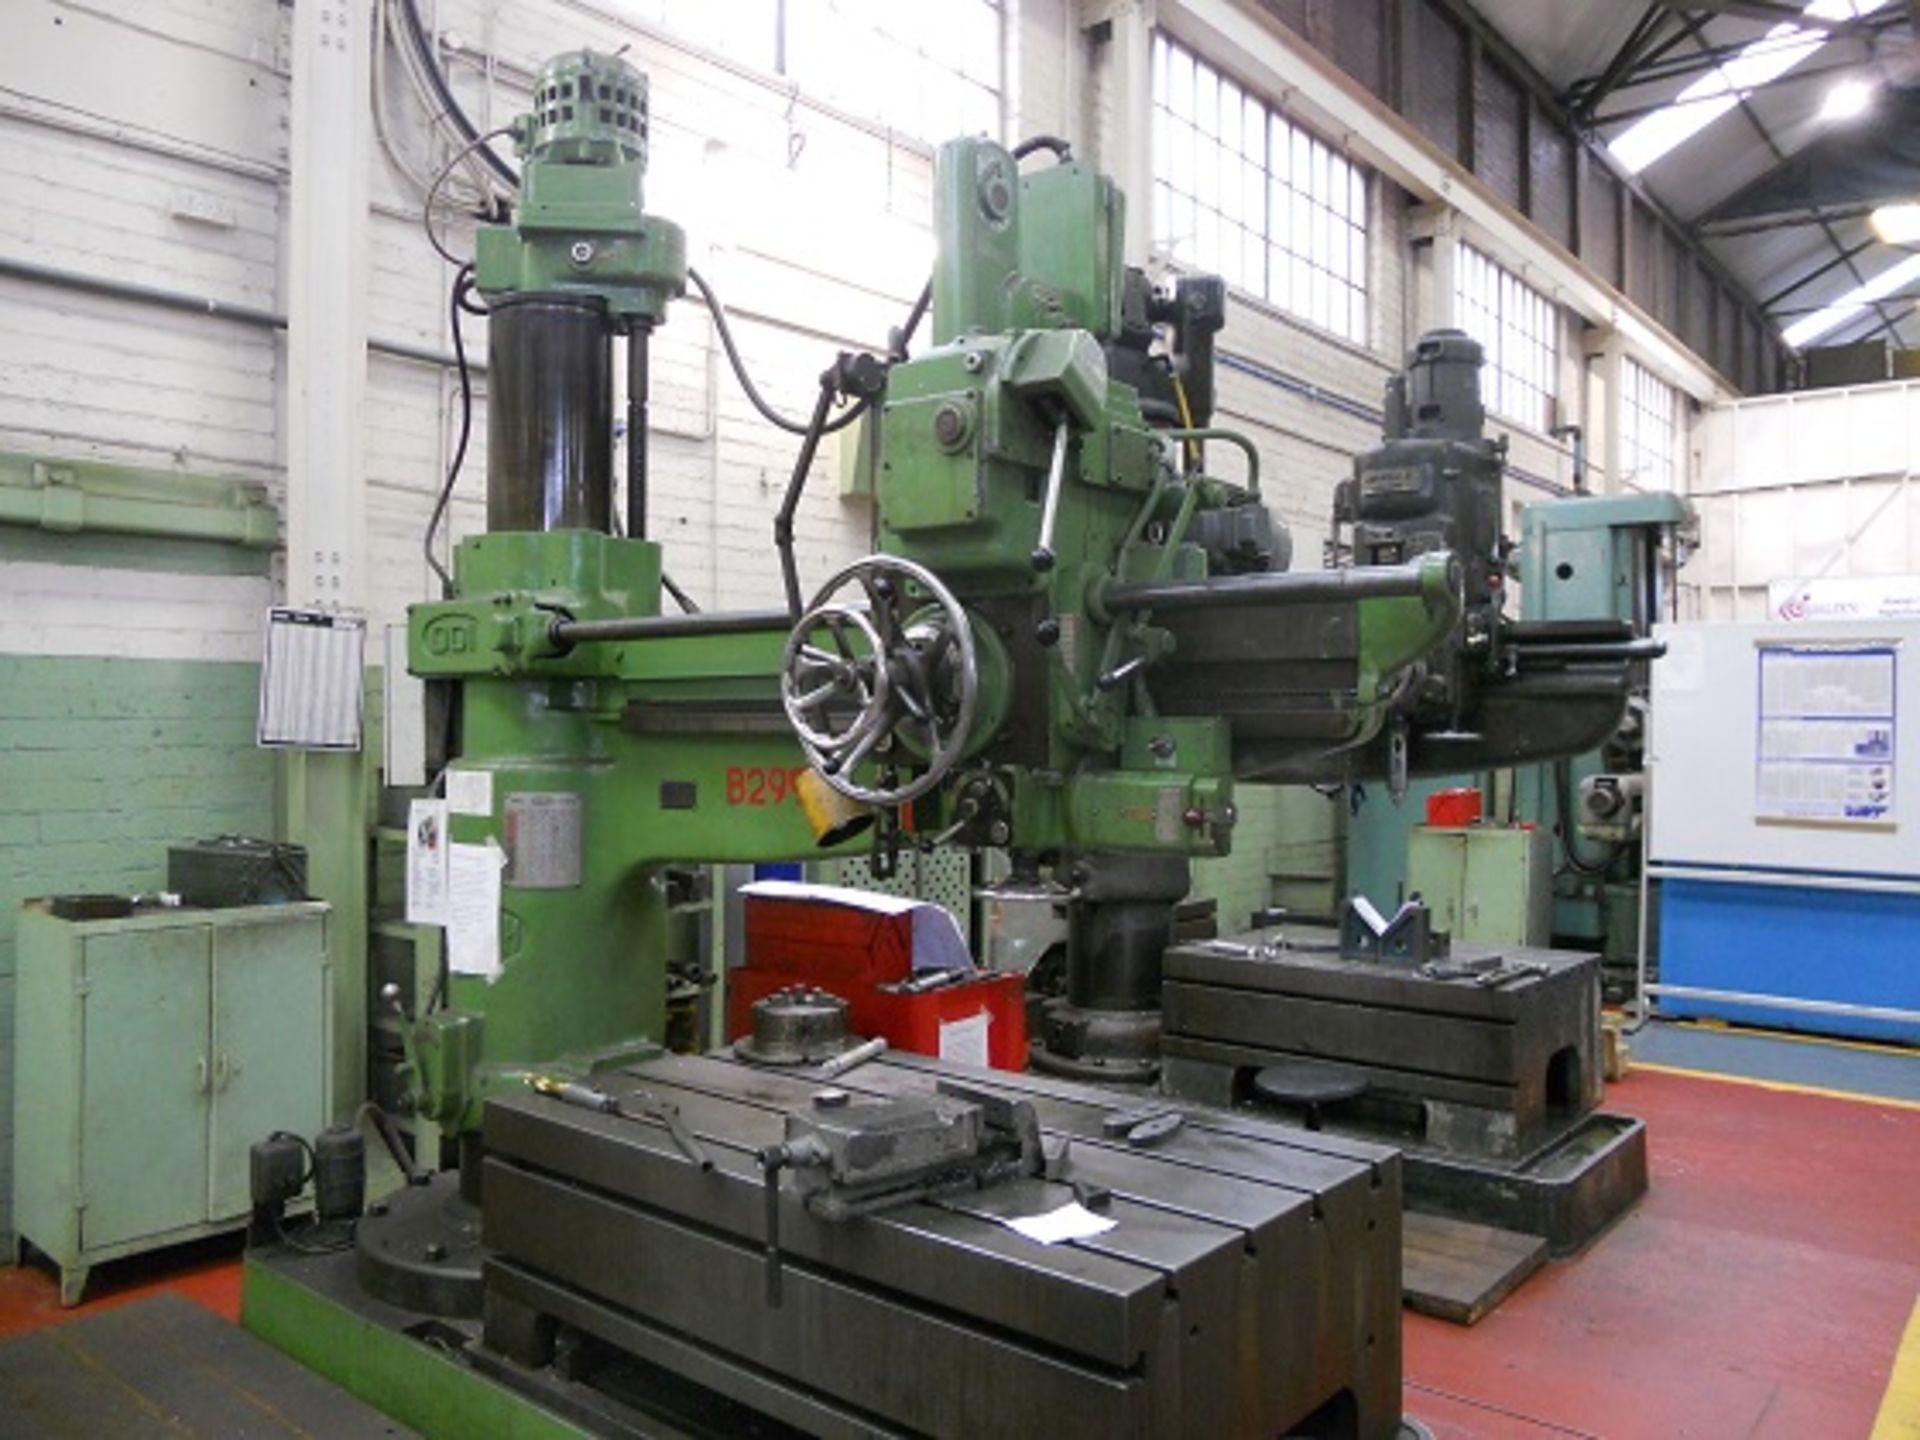 Asquith ODI 6'0" Radial Drill